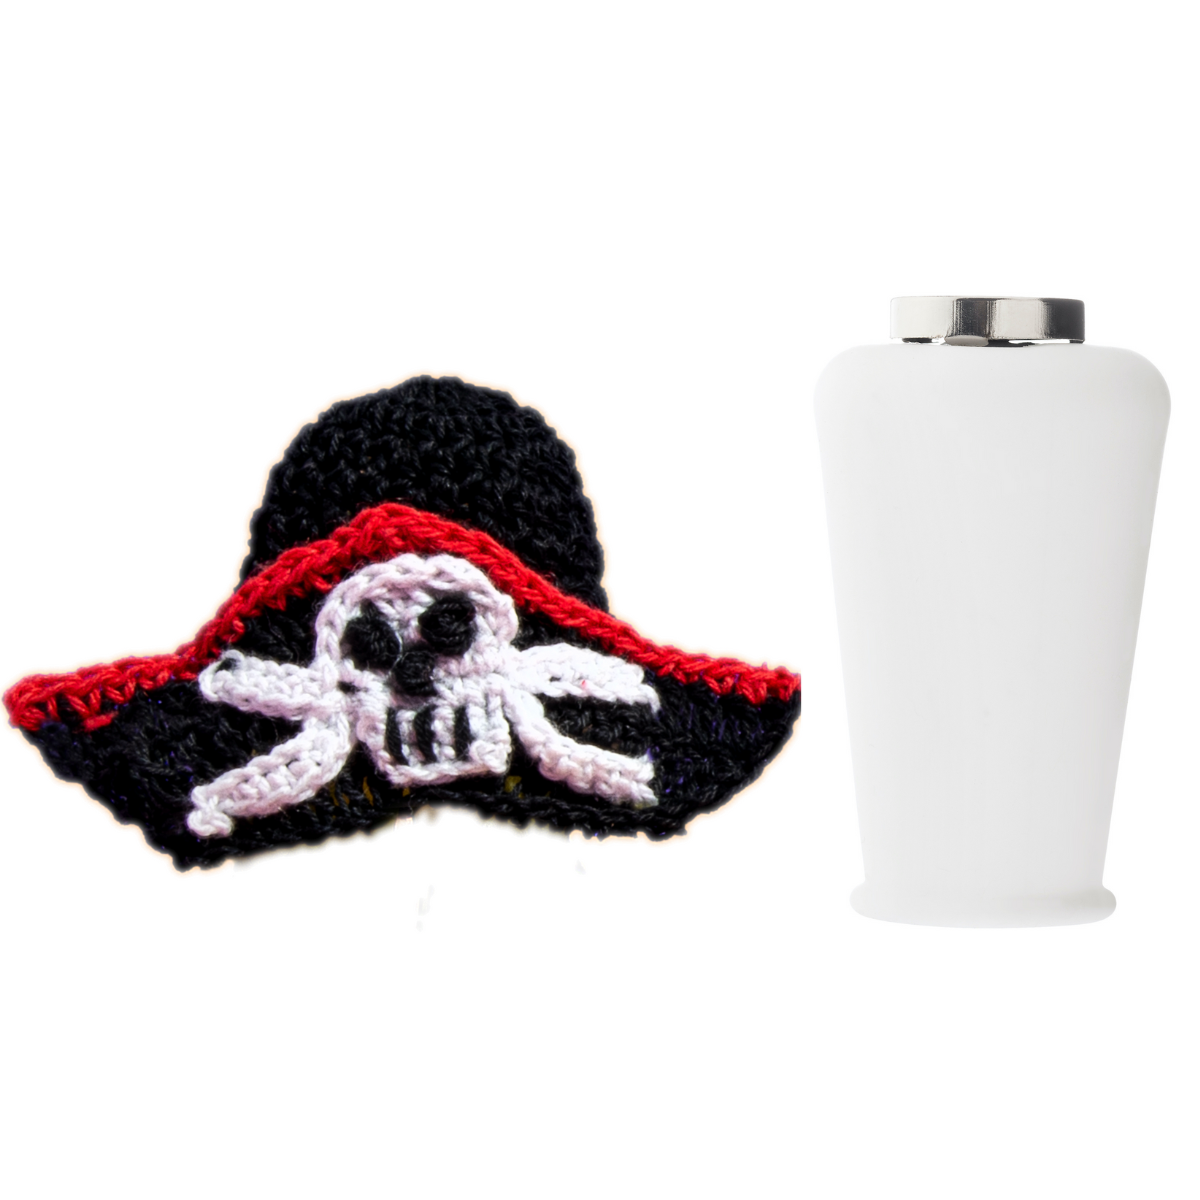 Pirate Nana Hat | Includes Standard Size BPA-Free Silicone Cap with Magnet